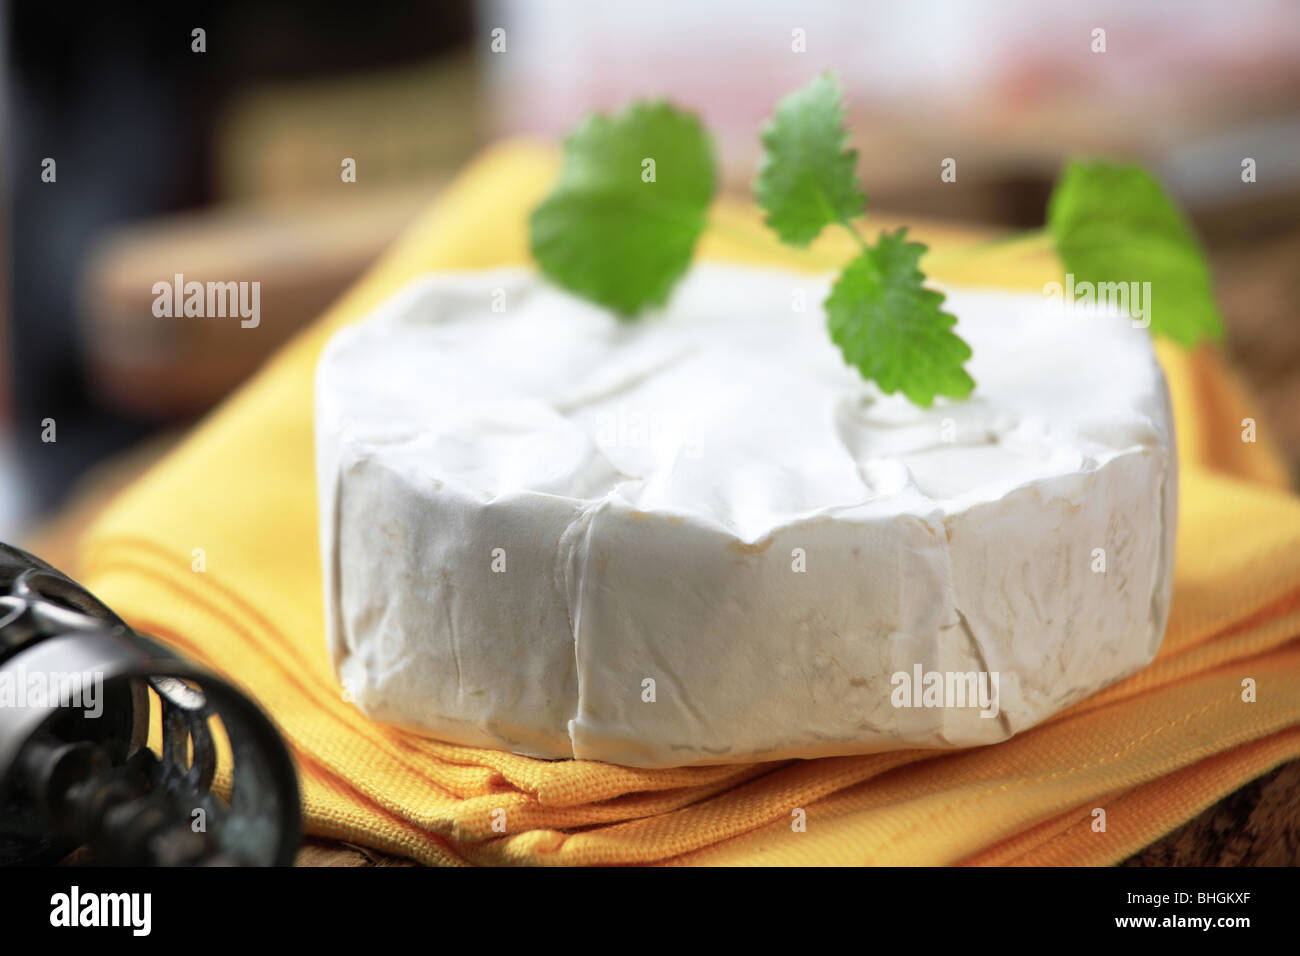 Soft cheese with edible white rind Stock Photo